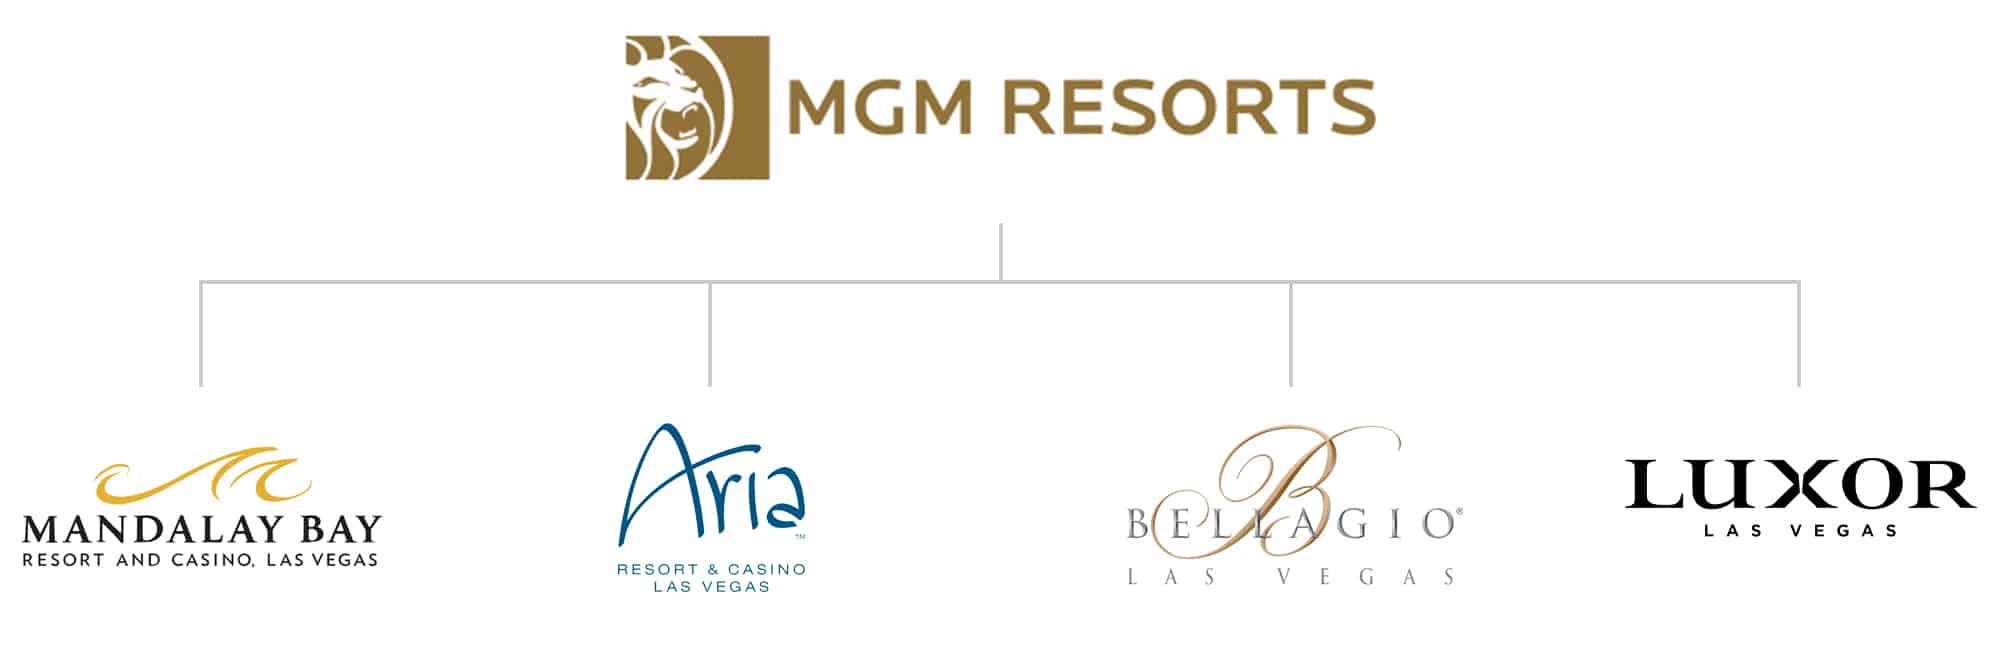 MGM Resorts brand architecture example